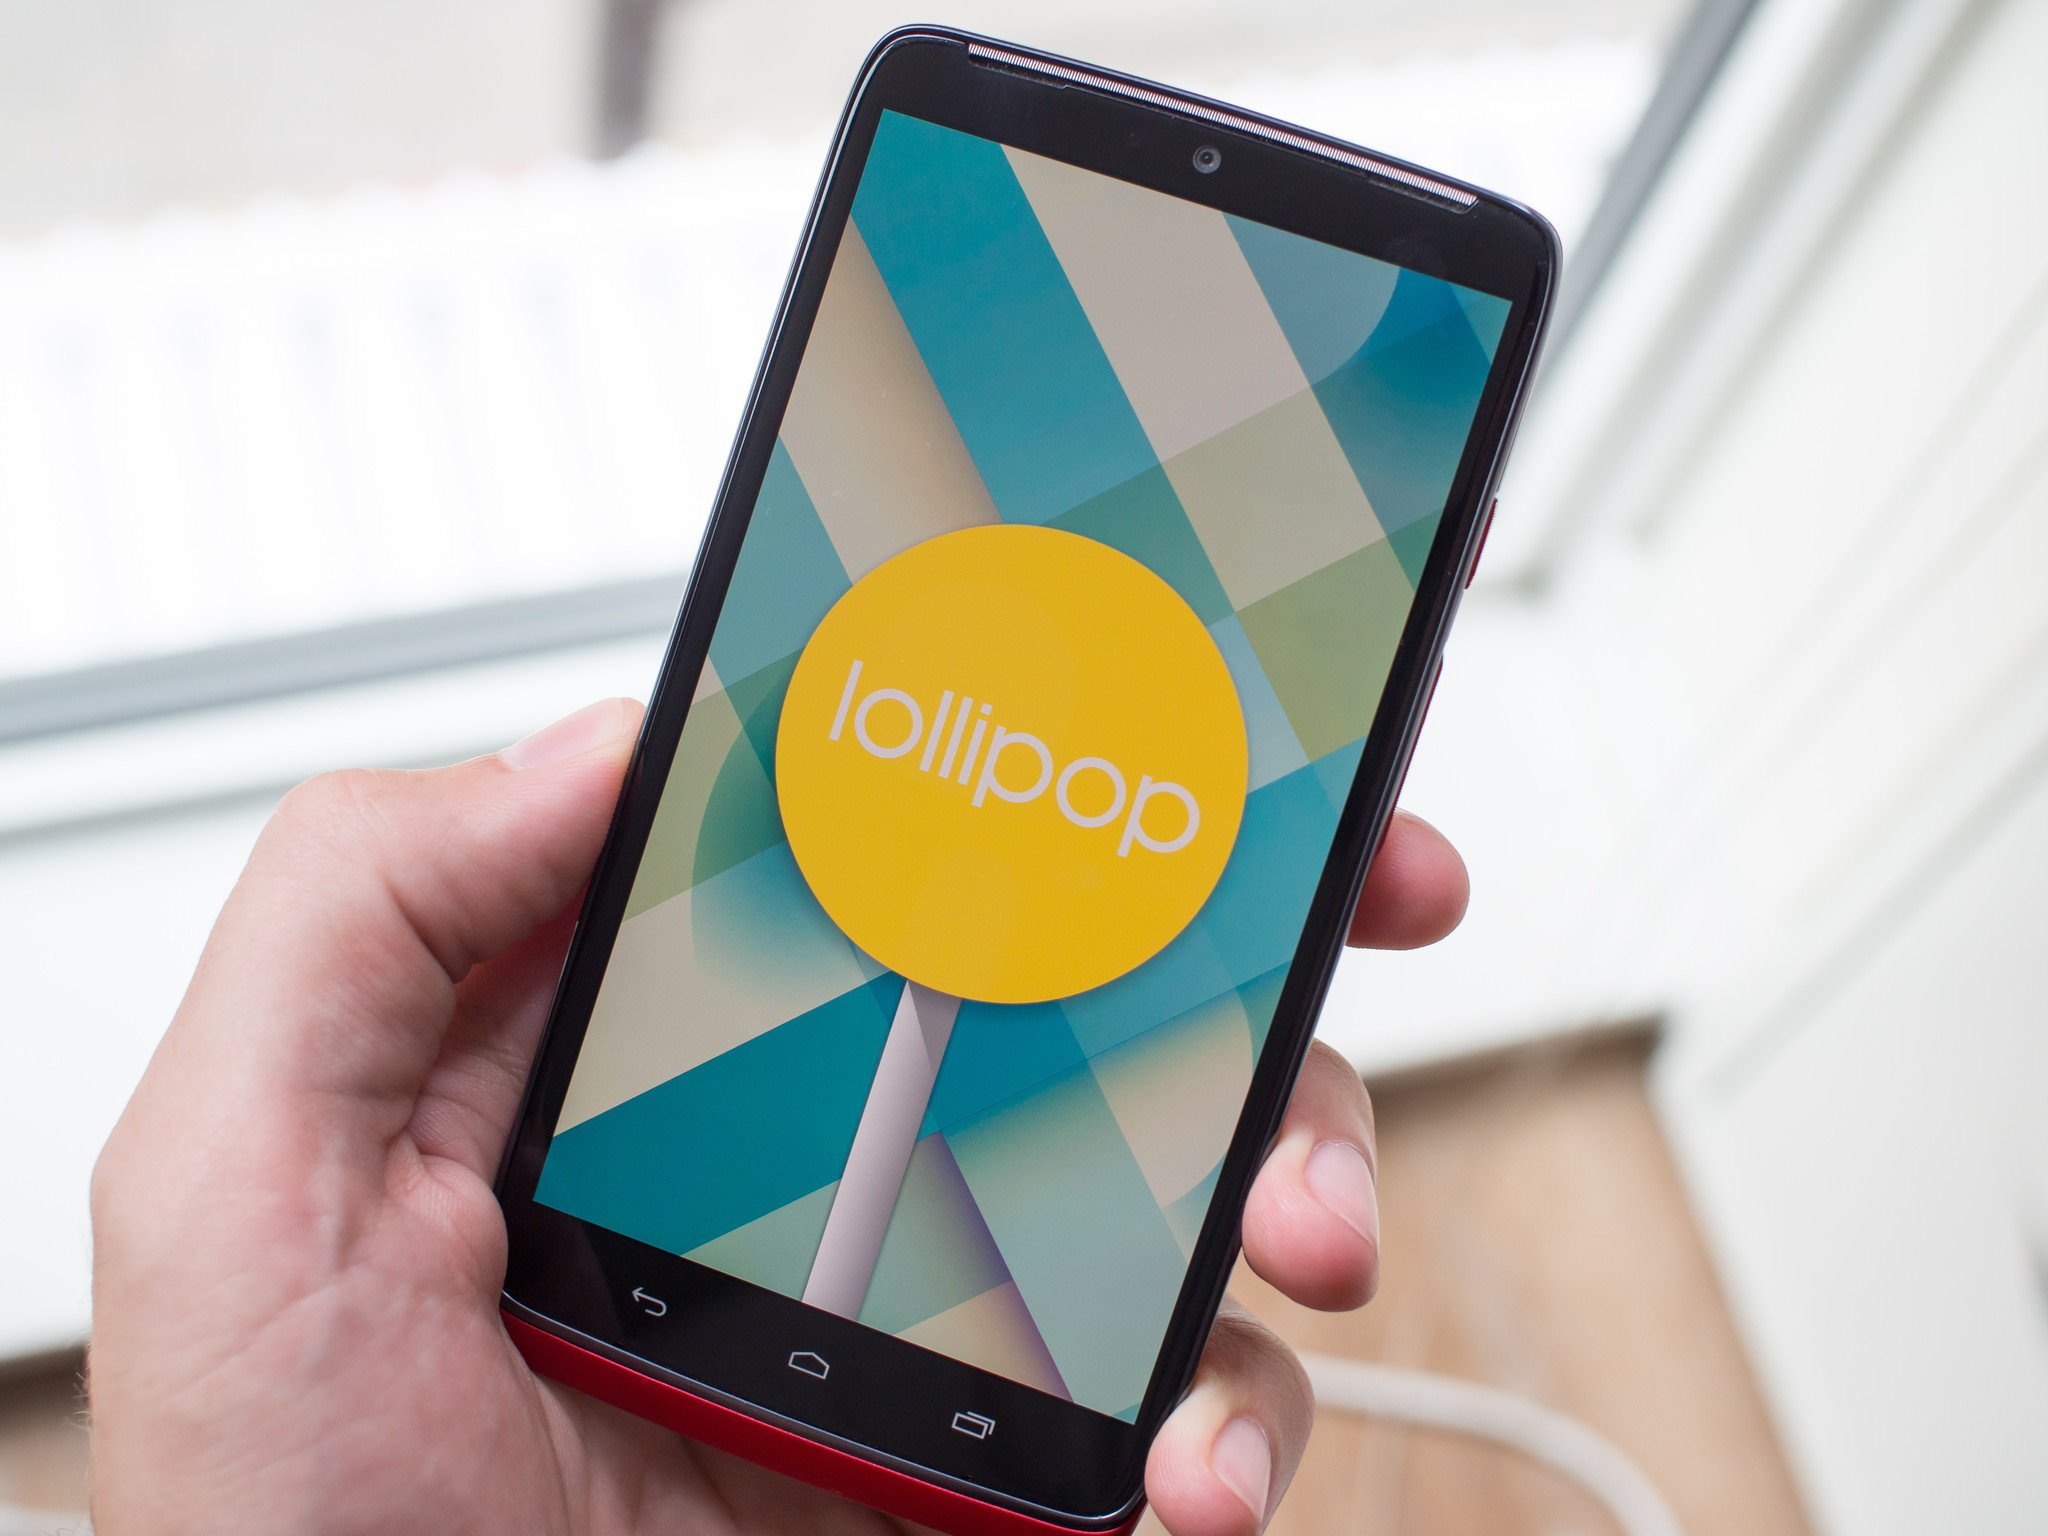 Lollipop now running on 18.1 percent of active Android devices